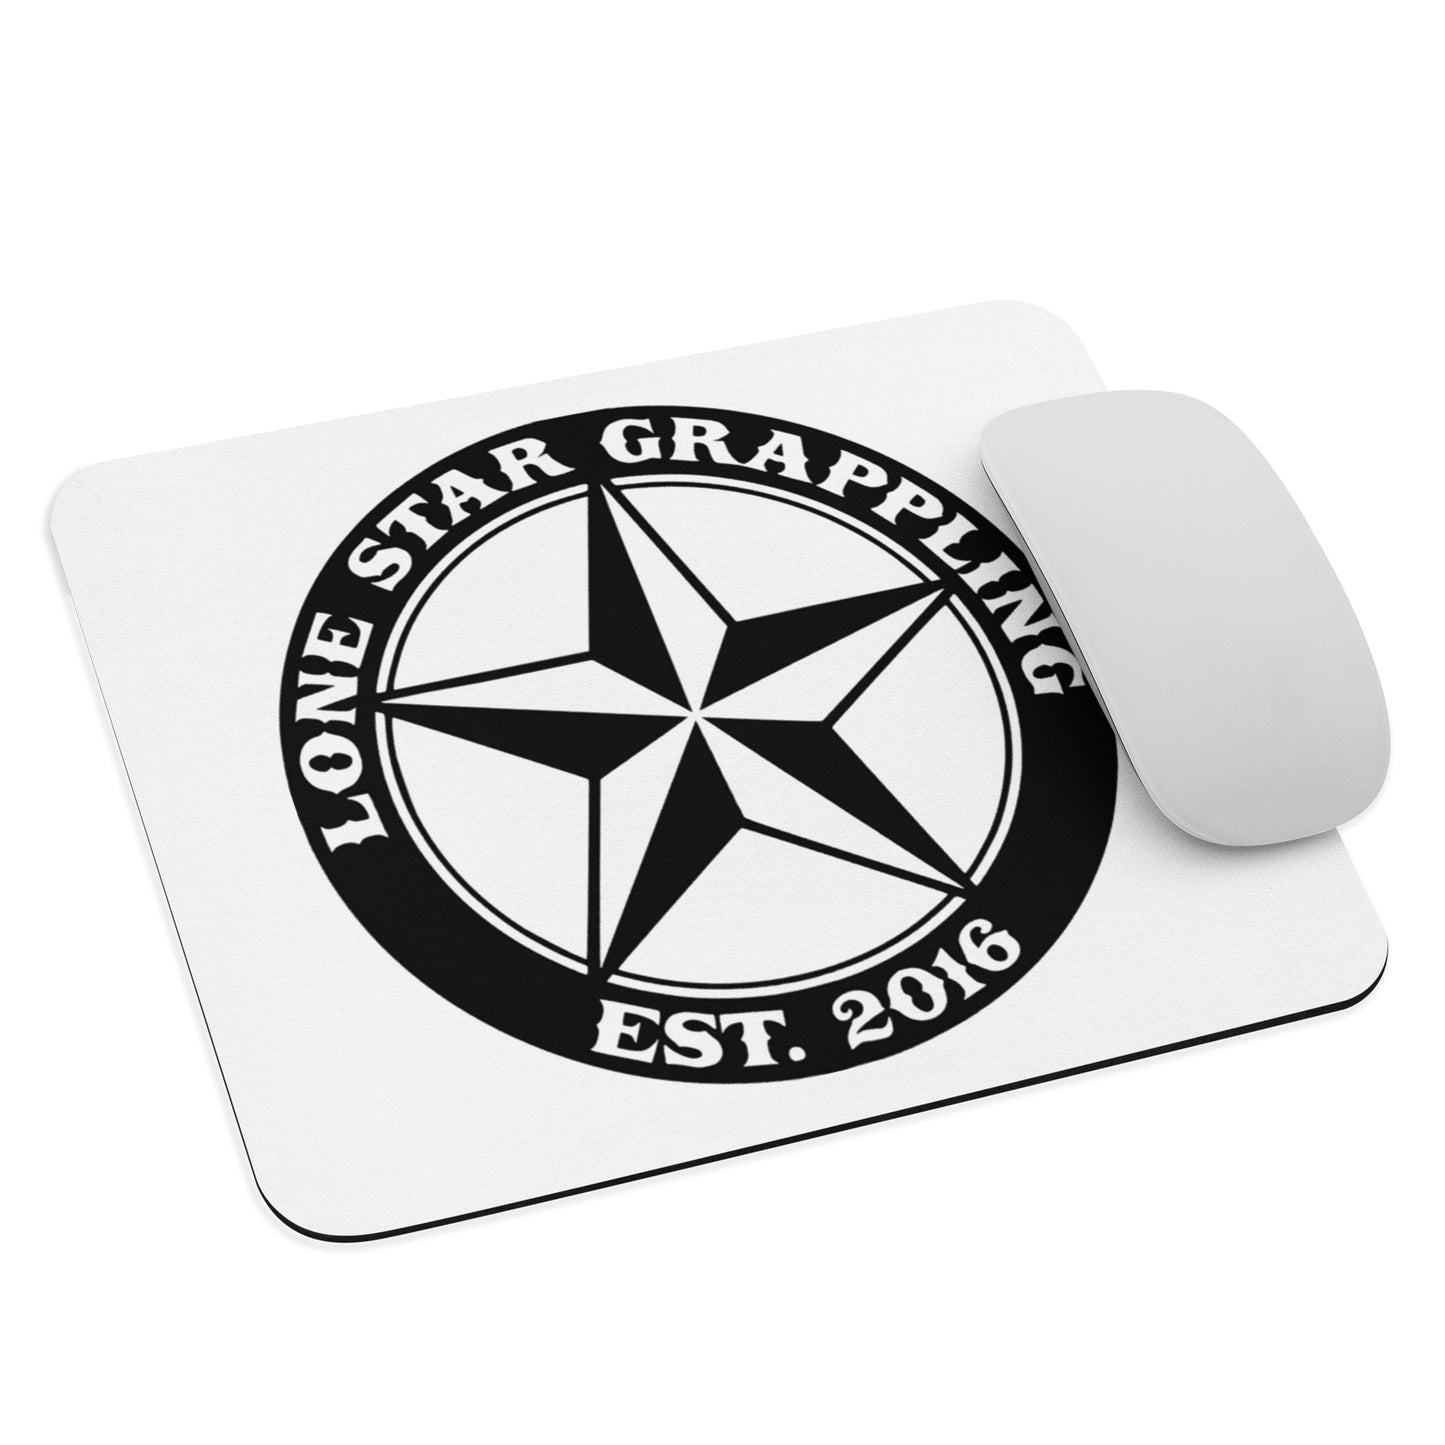 Lone Star Grappling Mouse Pad